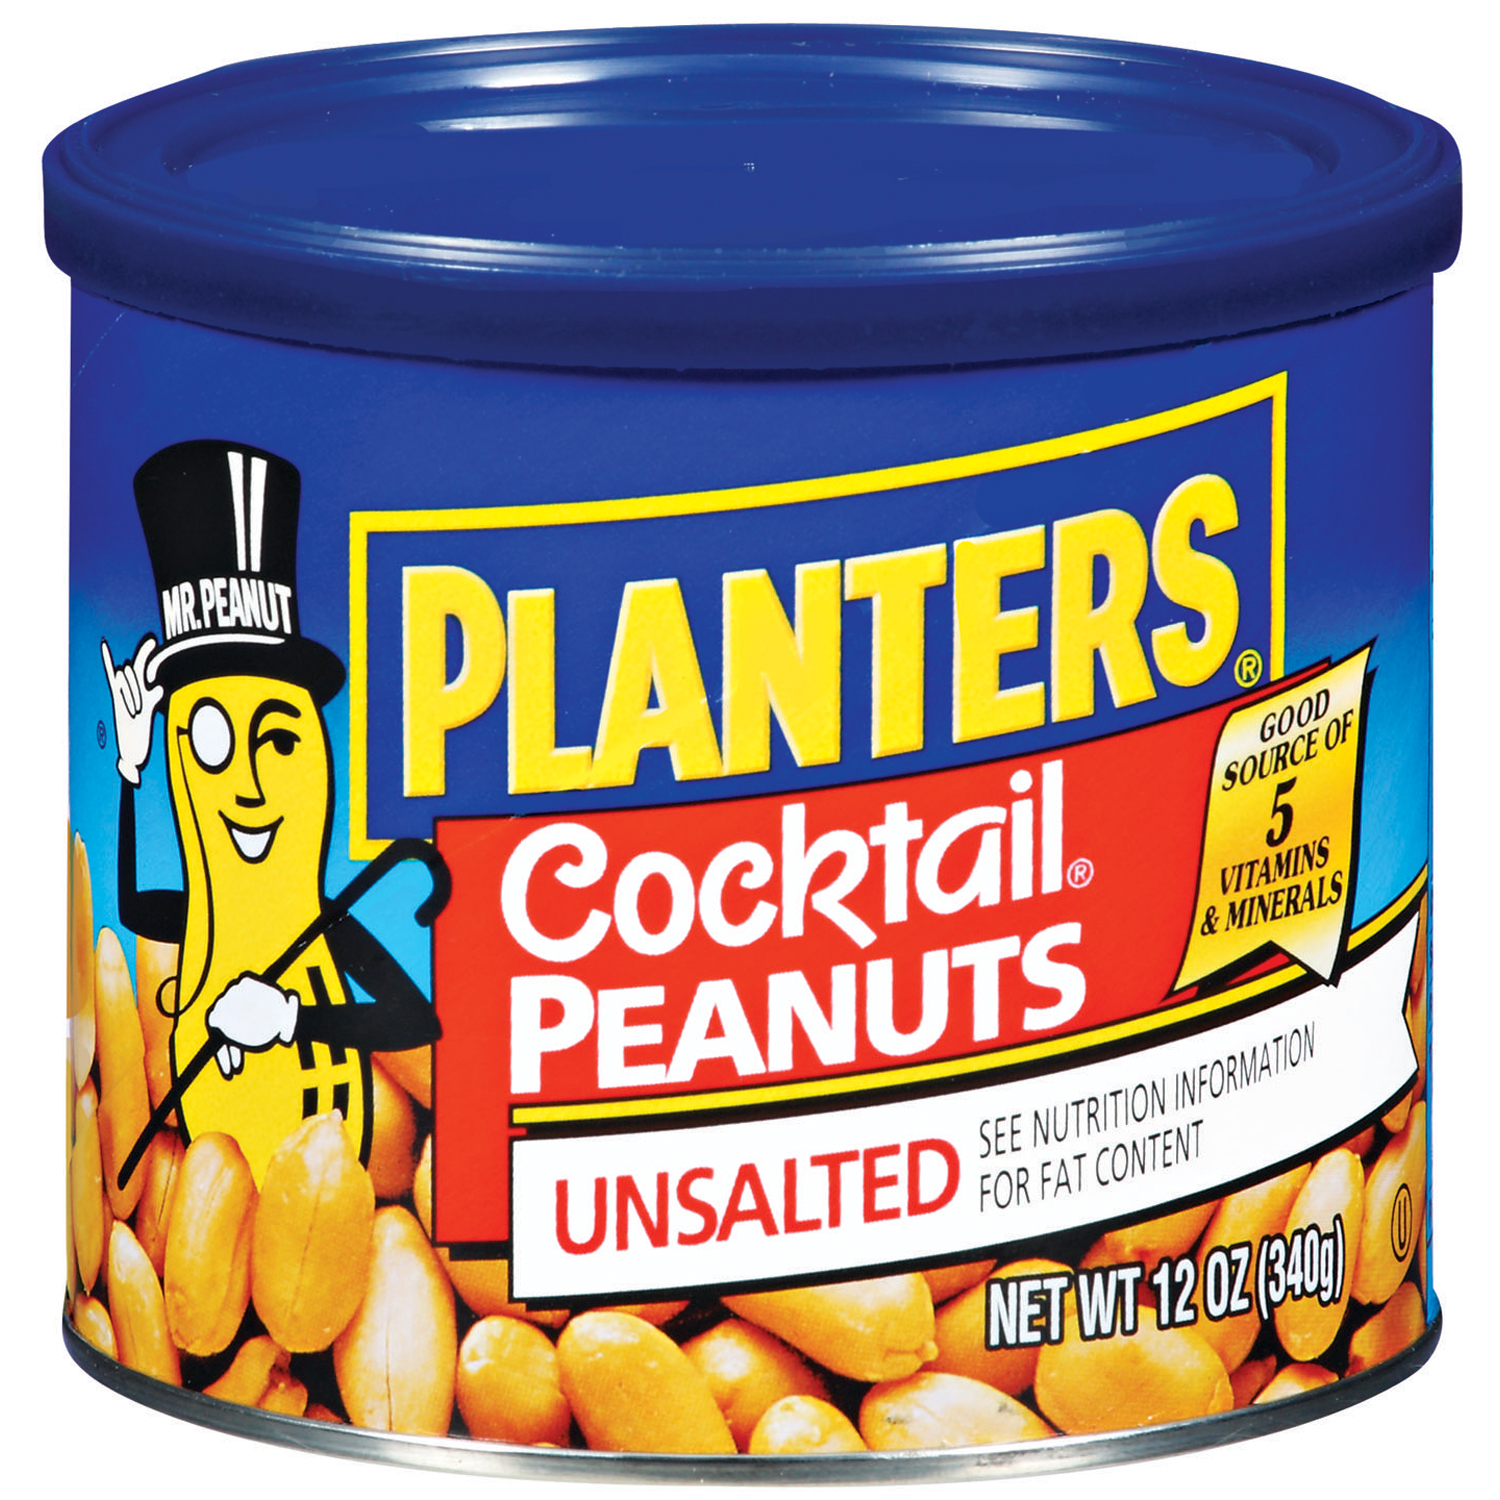 Planters Cocktail Peanuts, Unsalted, 12 oz (340 g)